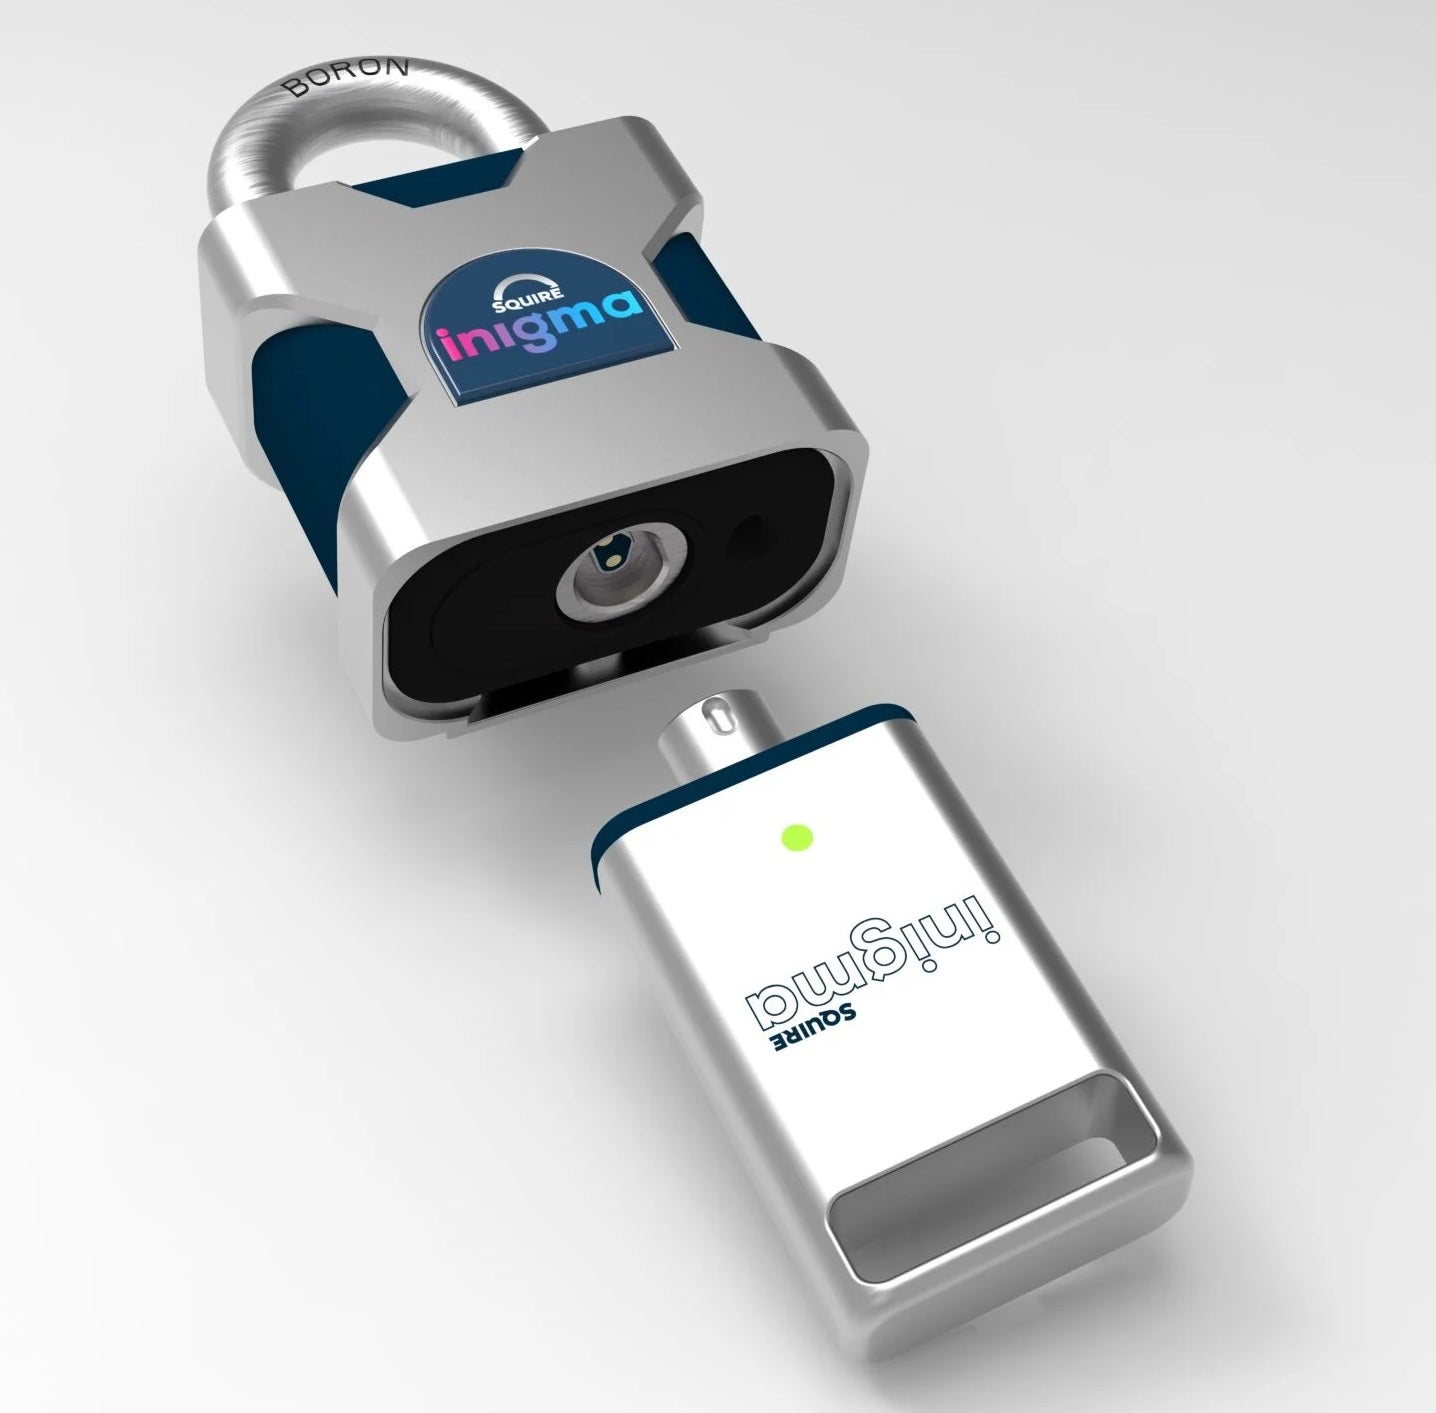 Squire Inigma: Smart Access Control for Padlocks and Cylinders